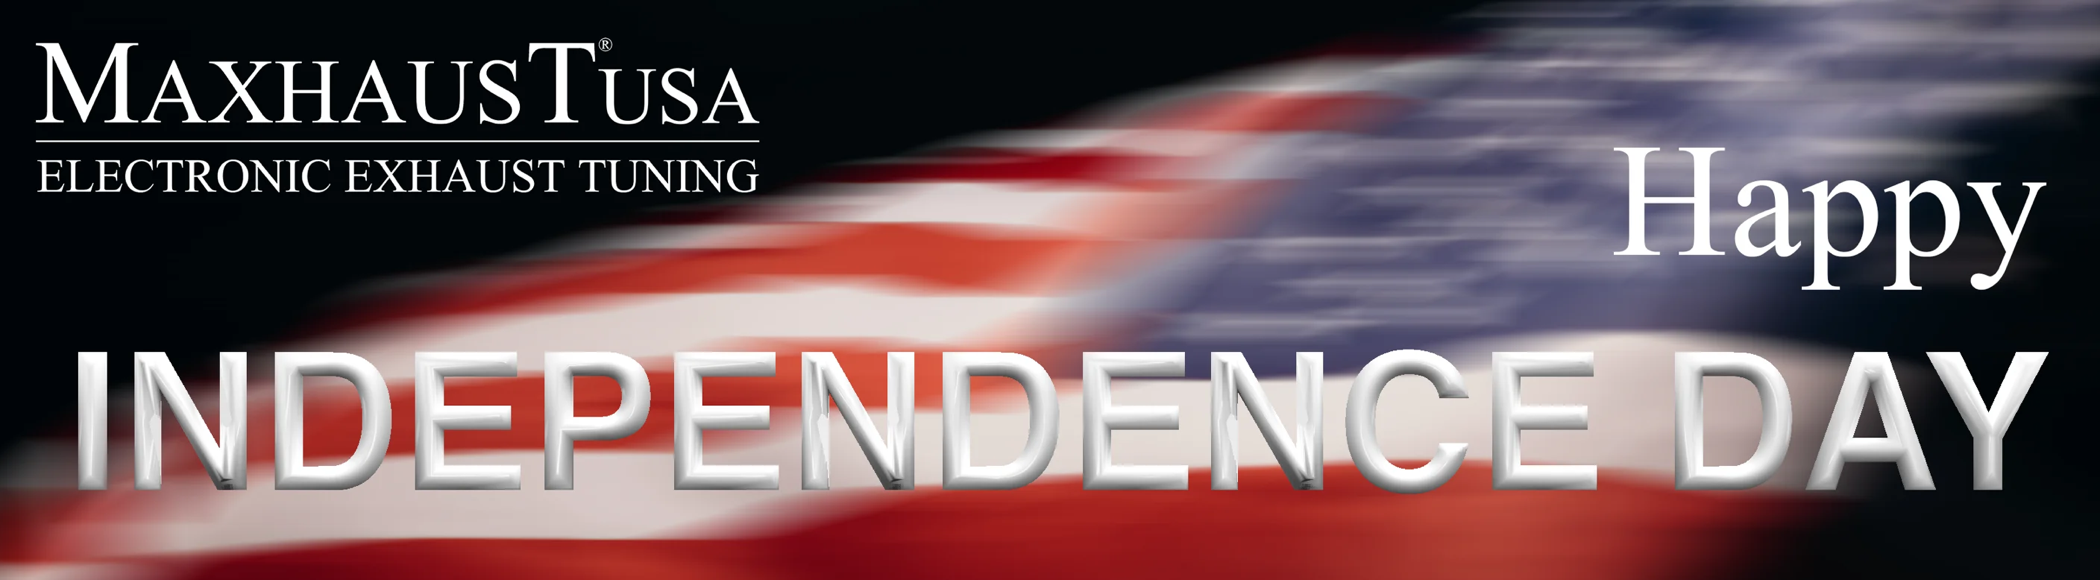 Maxhaust USA banner, Happy Independence Day